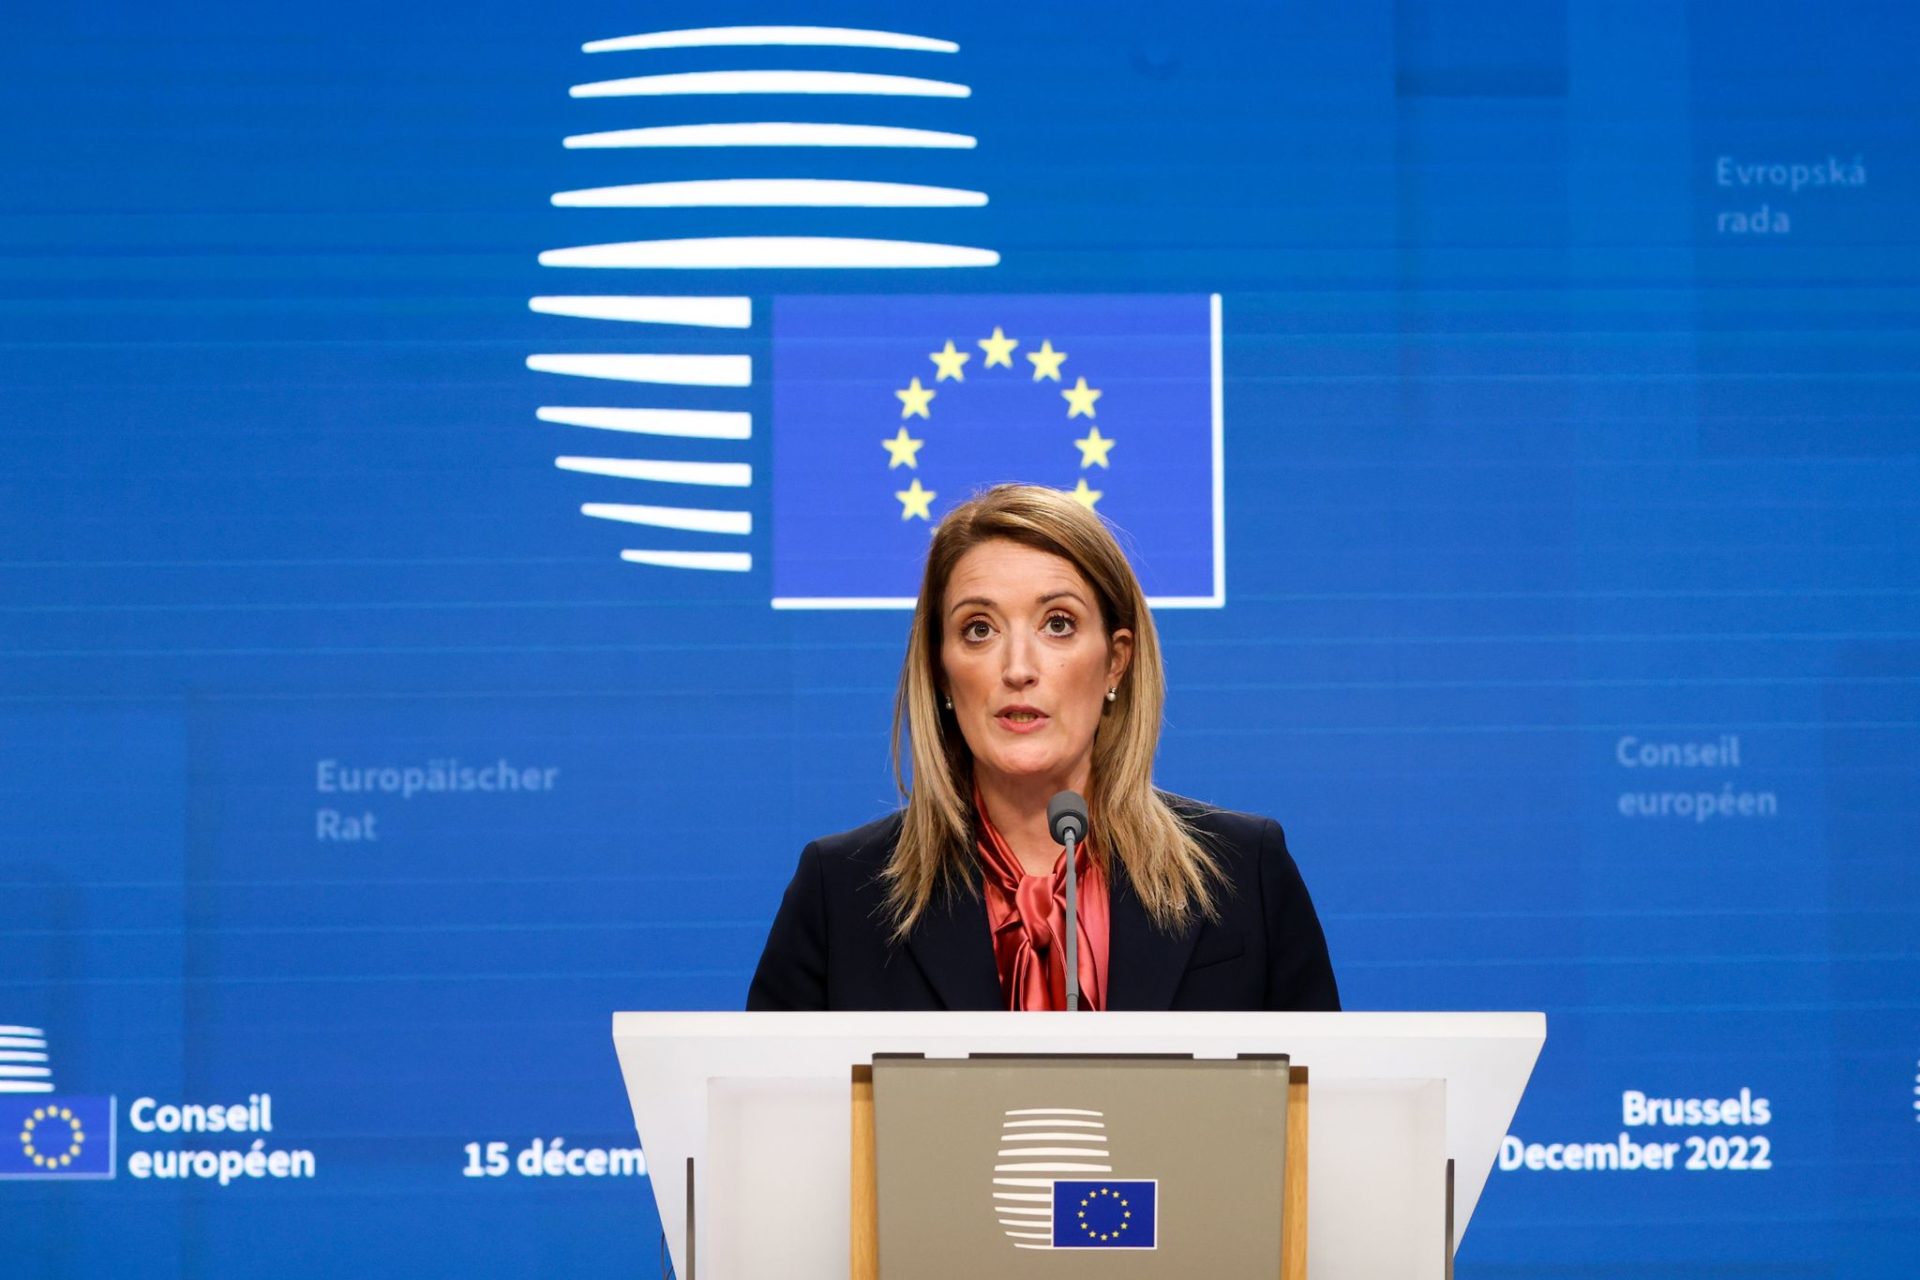 President of the European Parliament Roberta Metsola speaks during a press conference.